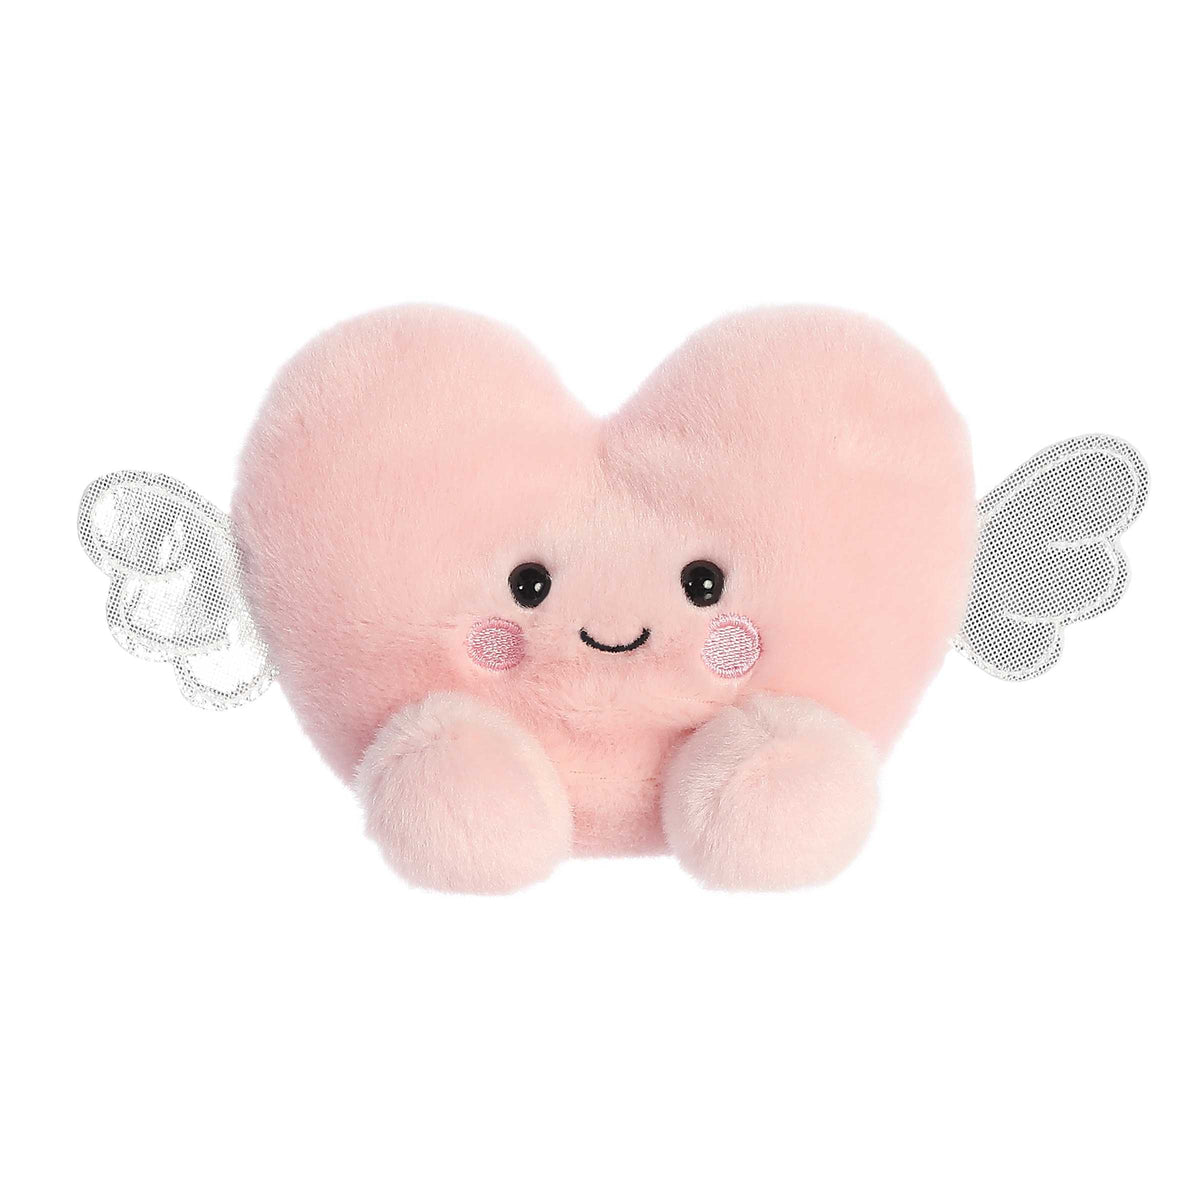 A blushing pink heart with delicate angel wings from the Palm Pals collection, perfect for Valentine’s Day celebrations.